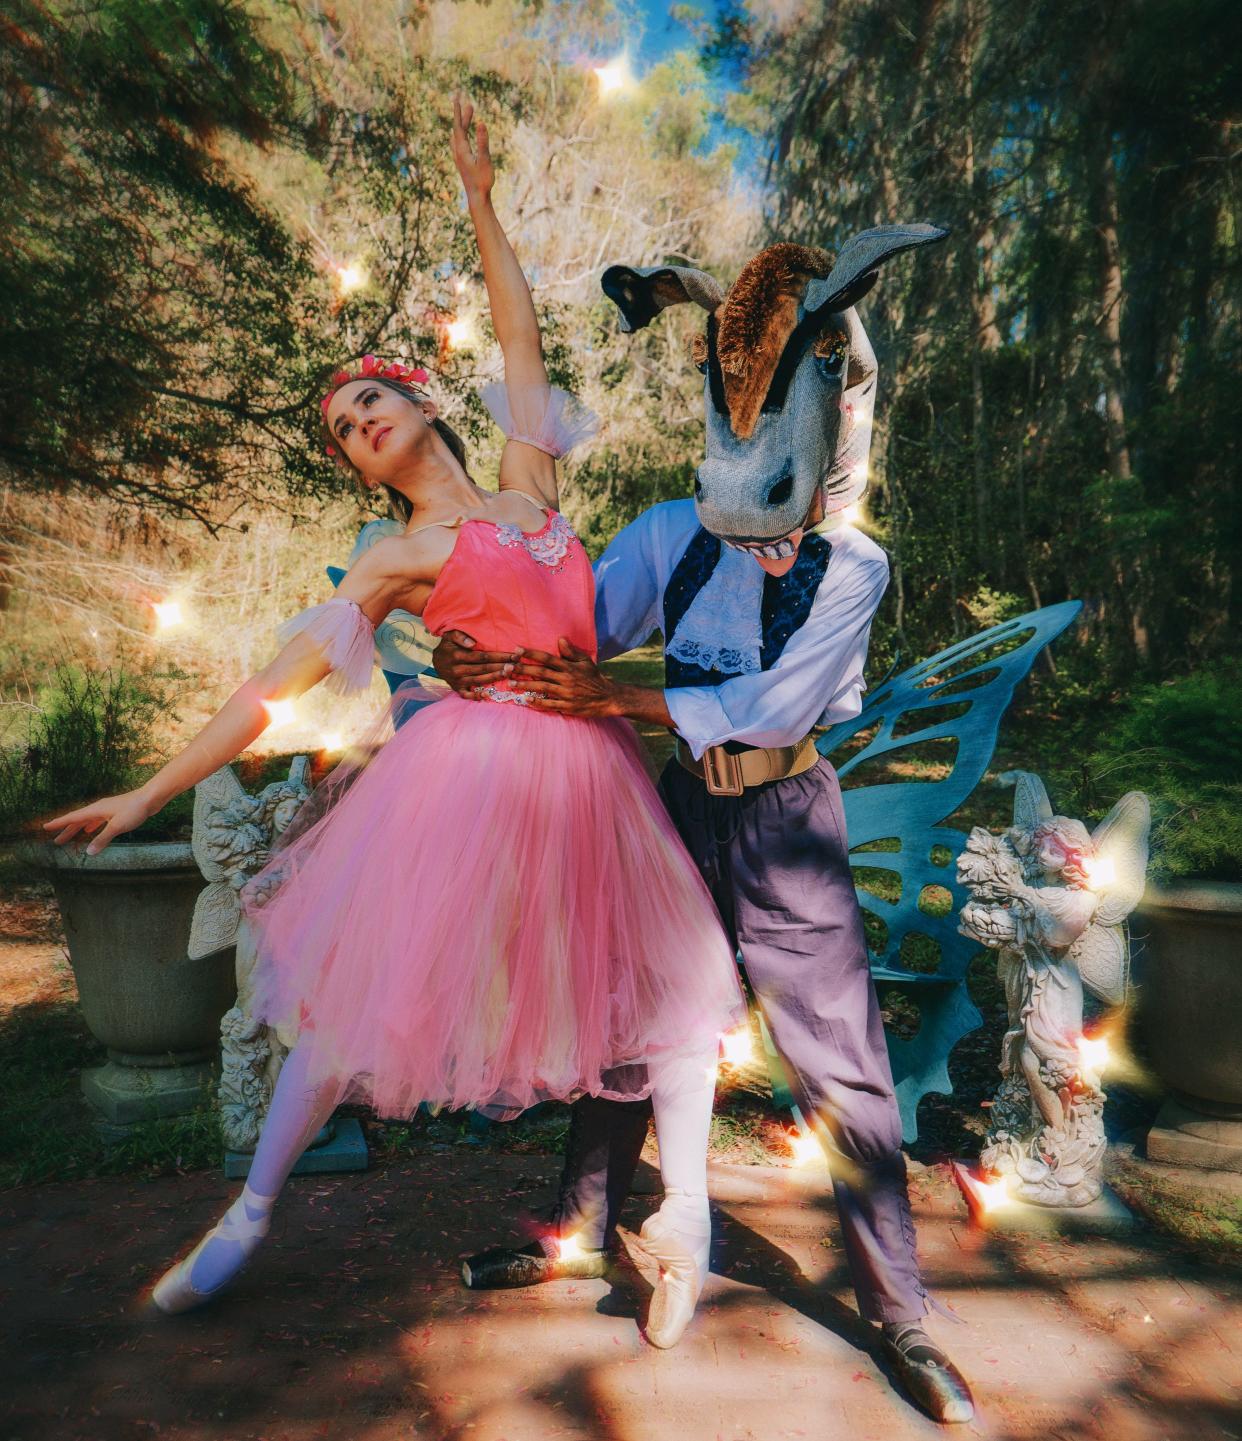 The Savannah Ballet Theatre will perform Shakespeare's 'A Midsummer Night's Dream' on March 24 and 25 at the Savannah Cultural Arts Center.